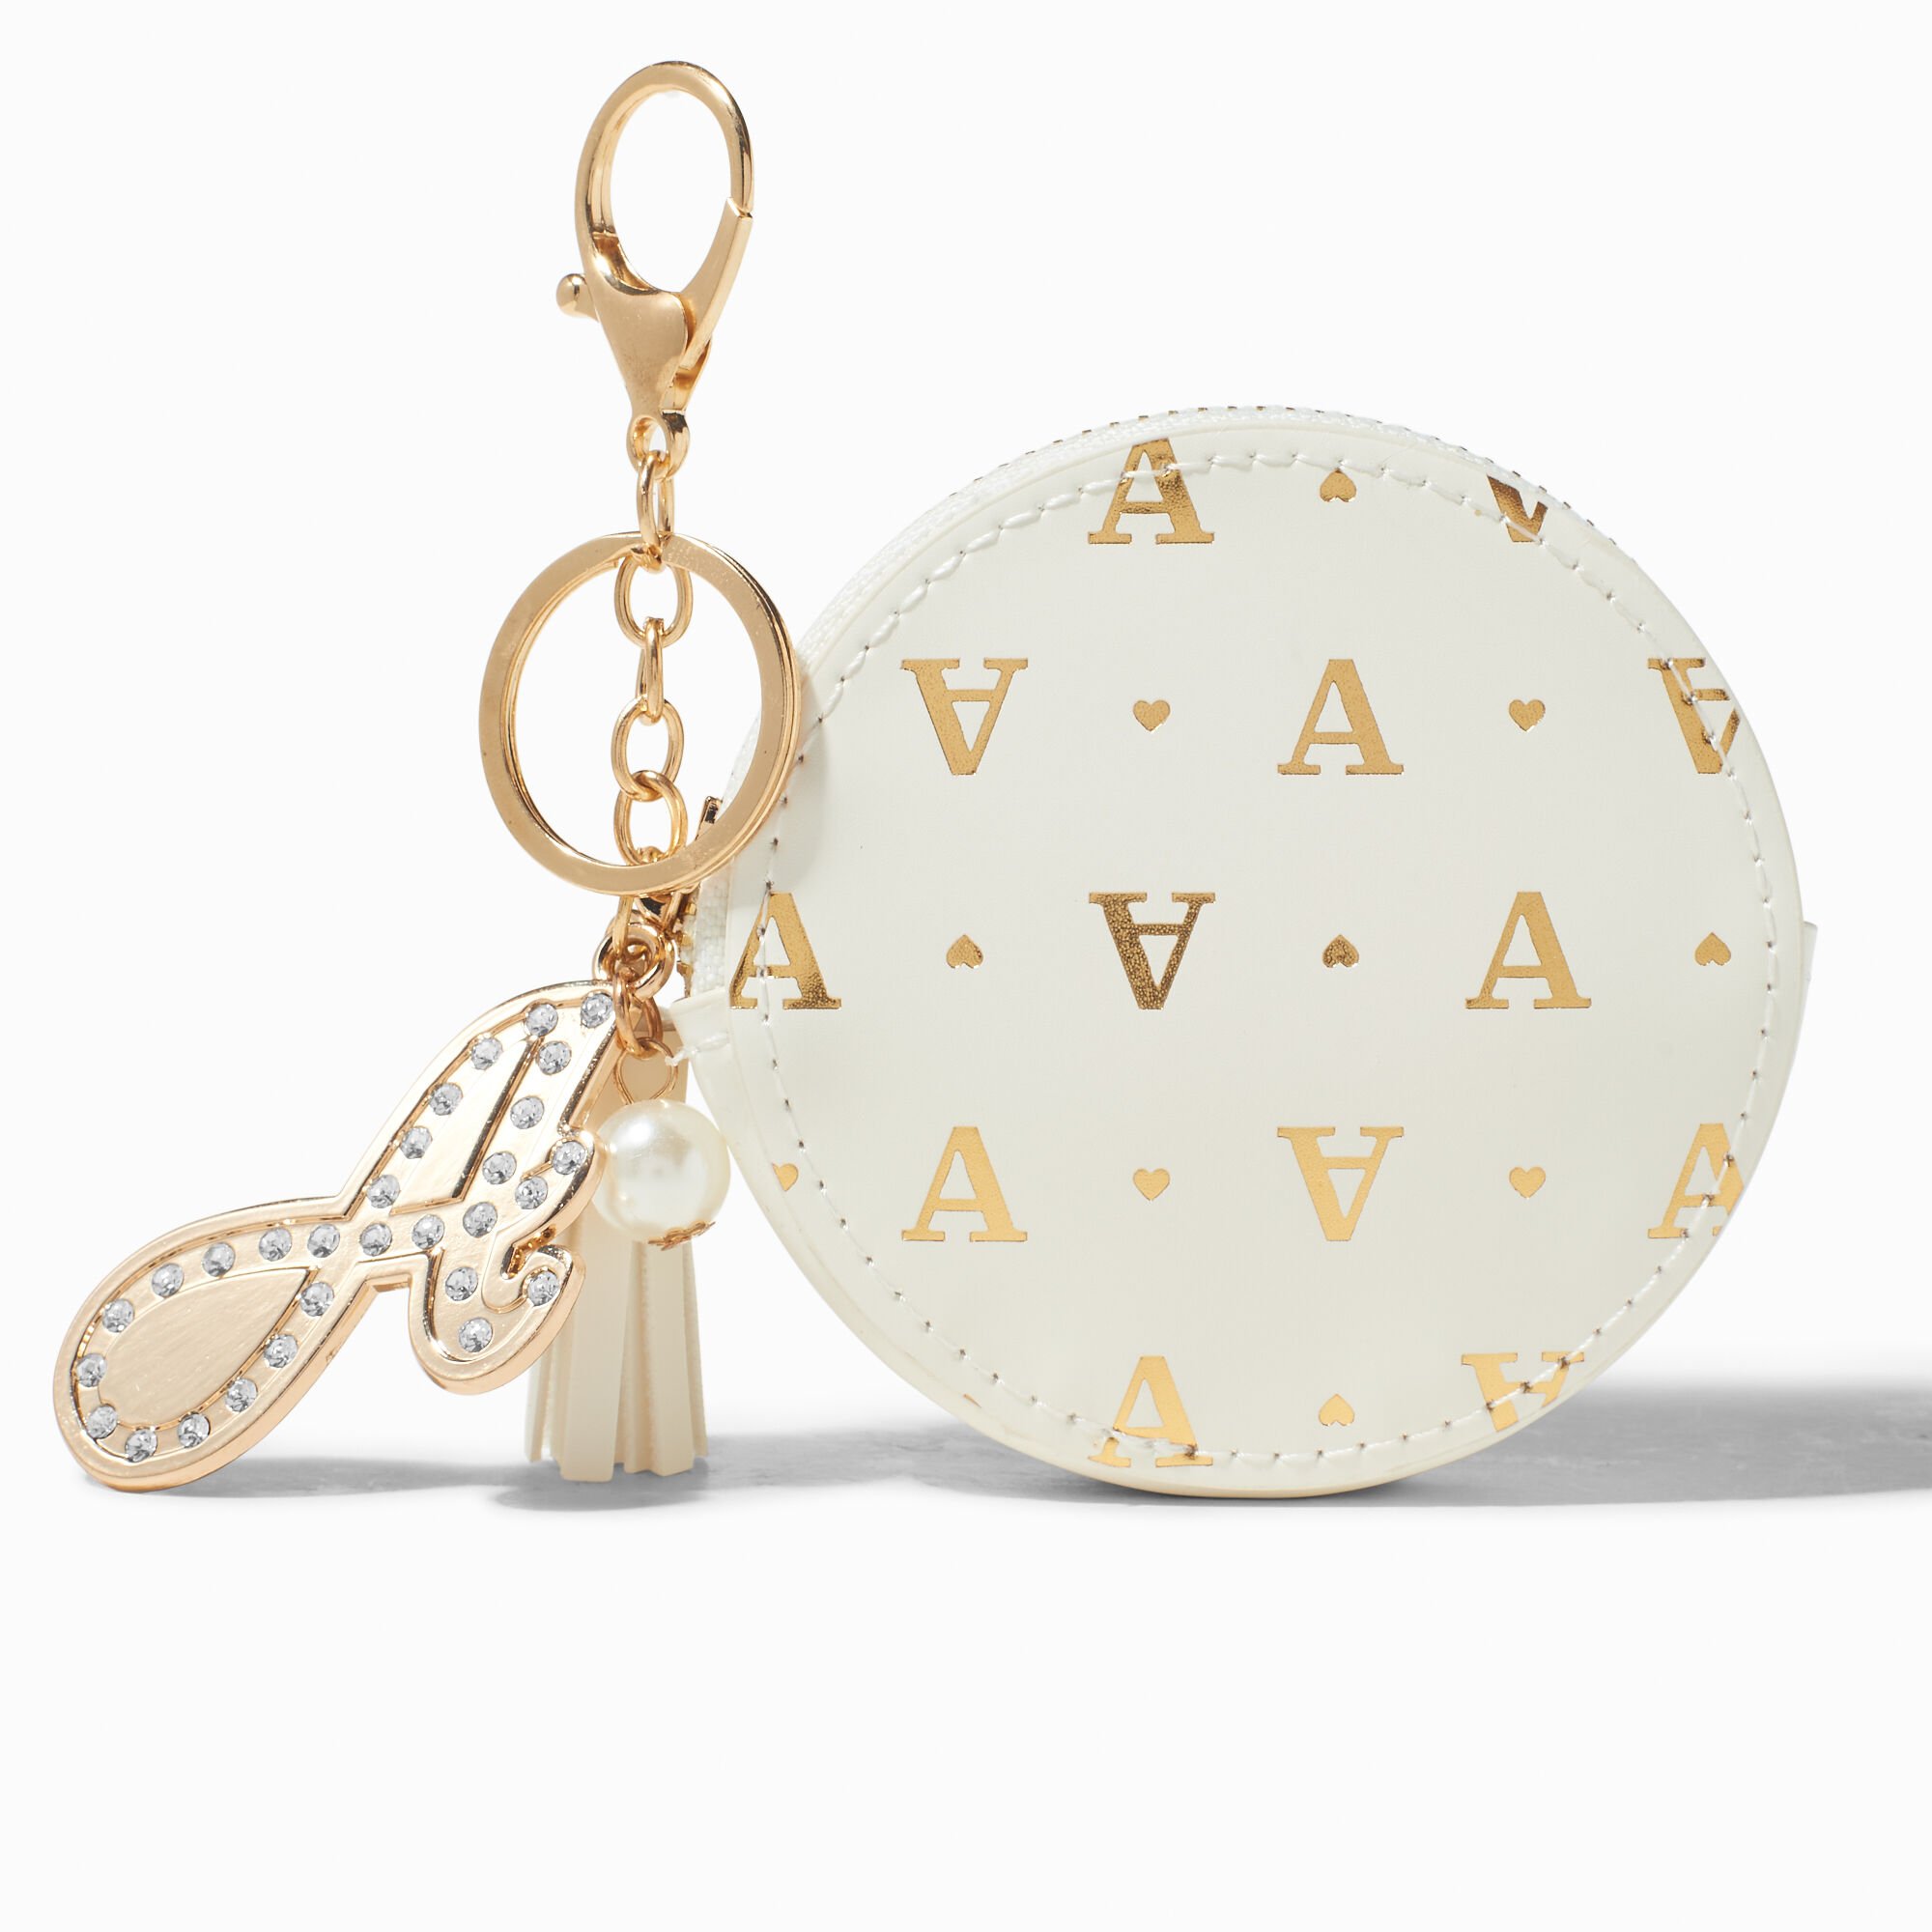 View Claires en Initial Coin Purse A Gold information